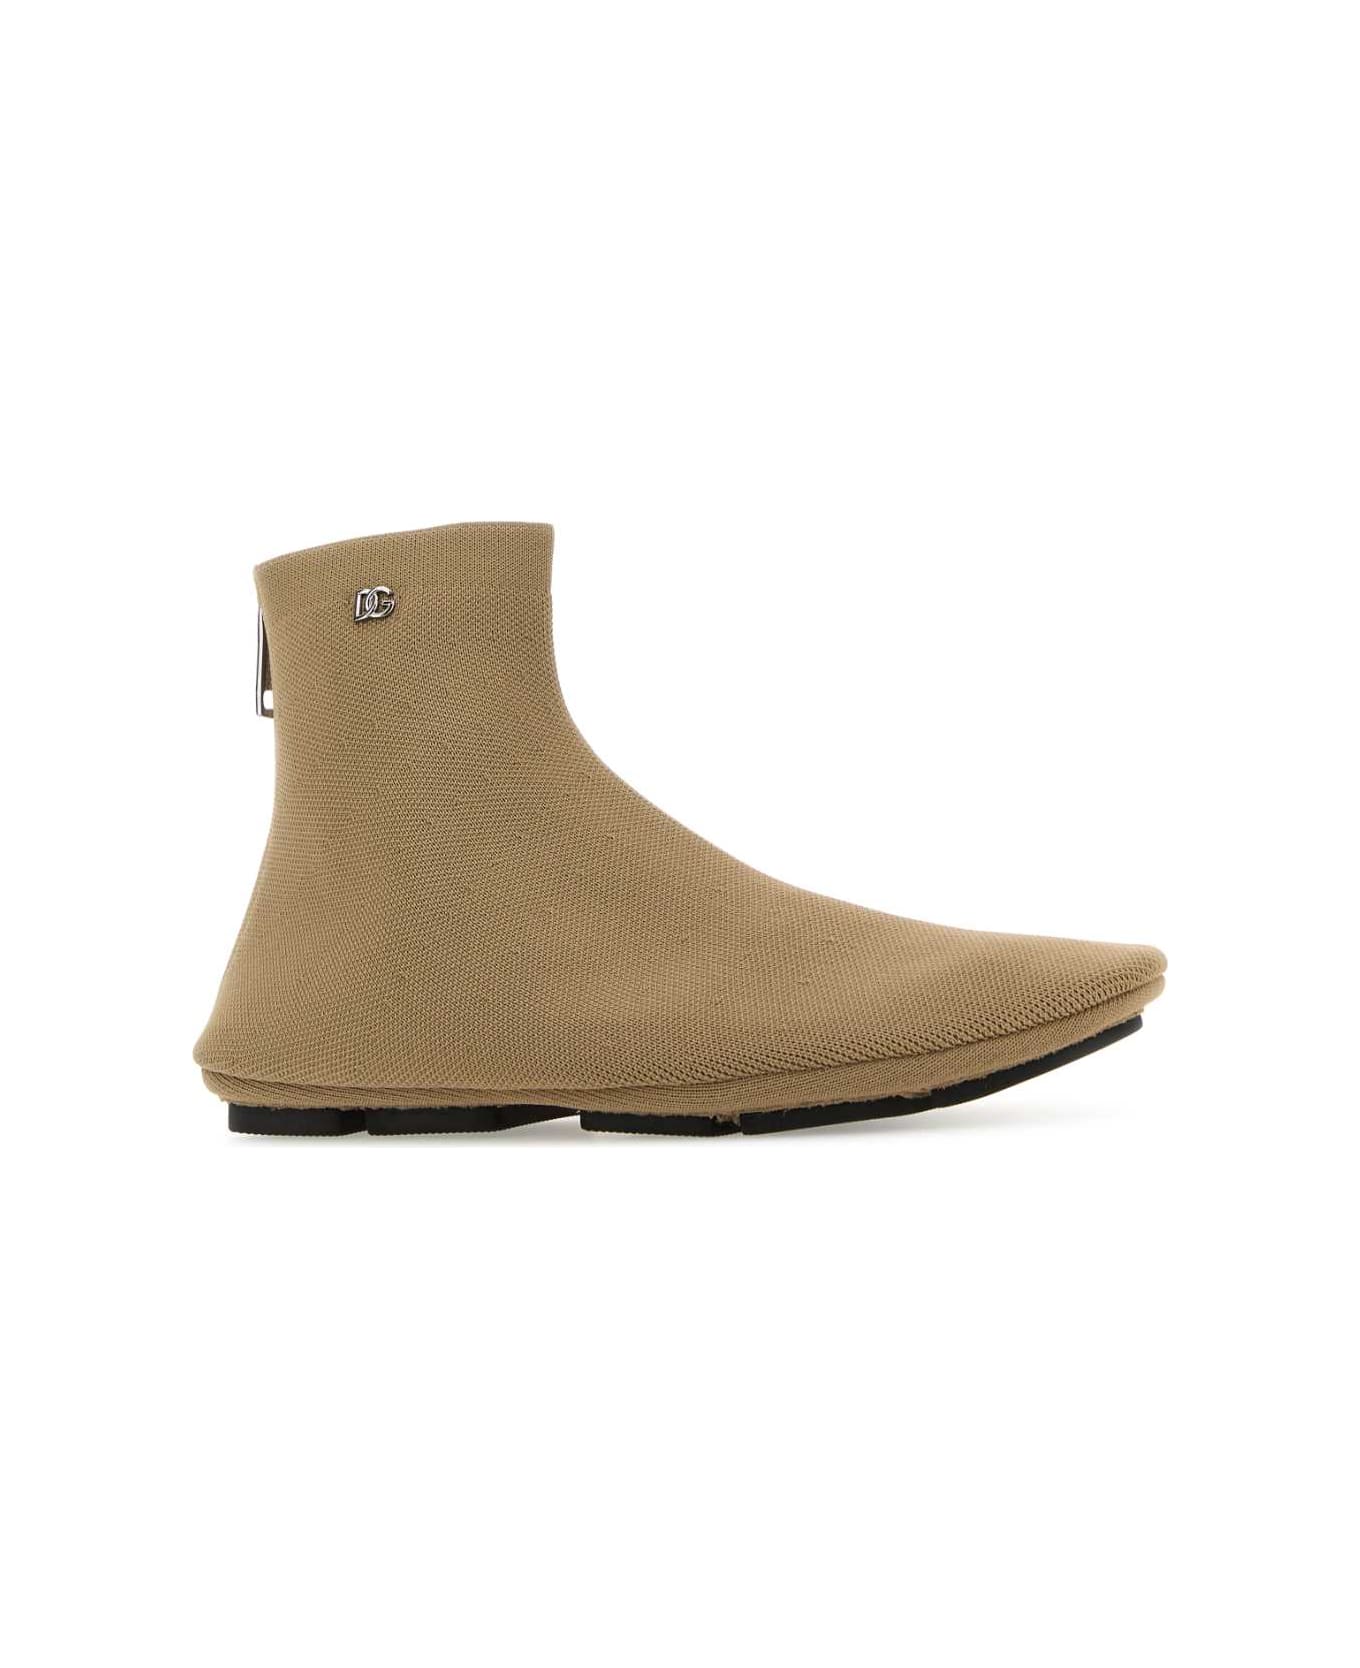 Dolce & Gabbana Ankle Boots - BEIGE